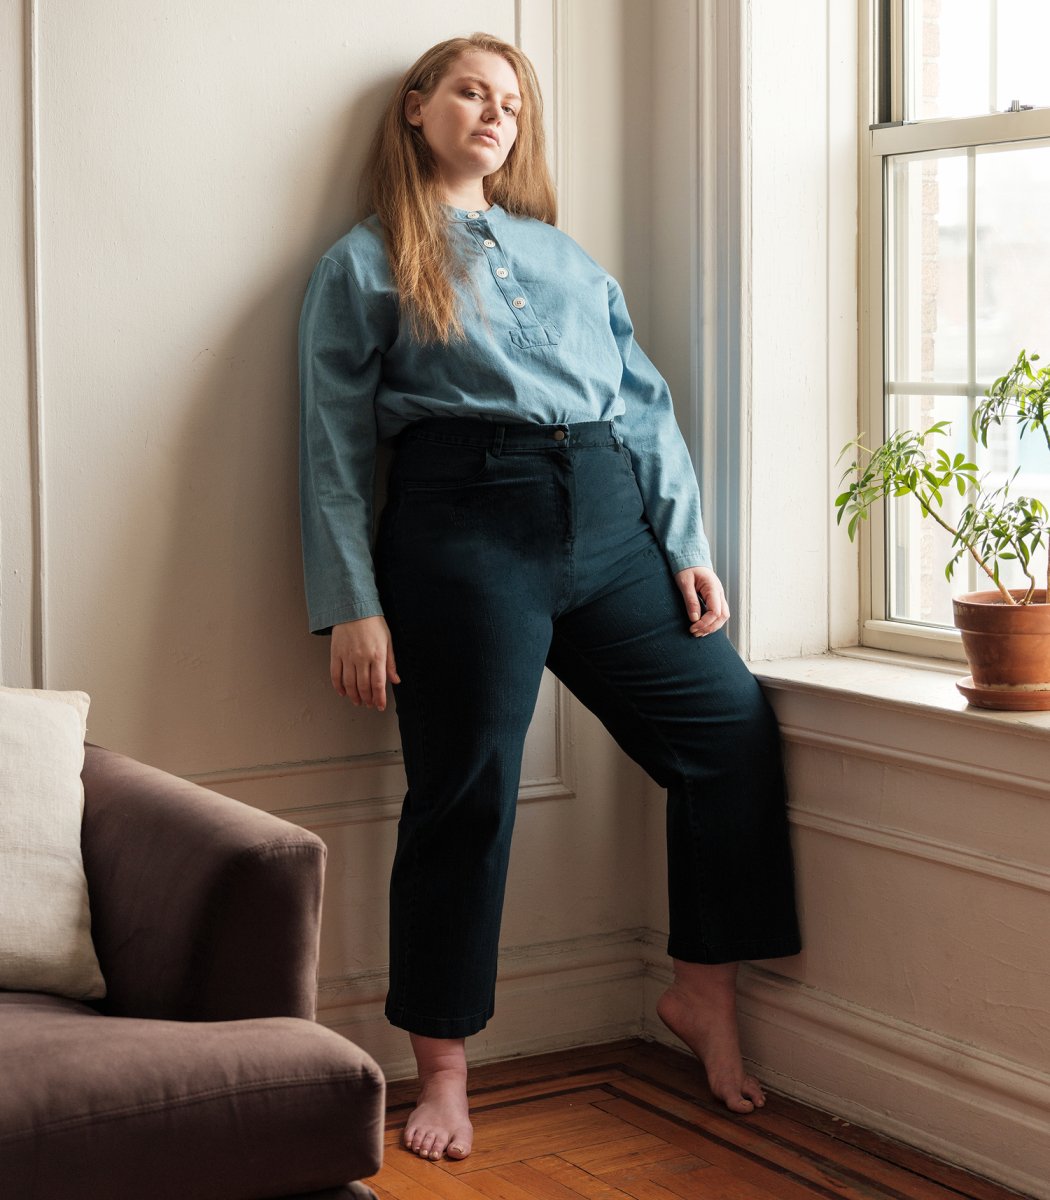 Model wears a straight leg jean in a dark indigo wash. The Parker jeans in Dark Indigo are designed by Loup and made in New York City, USA.